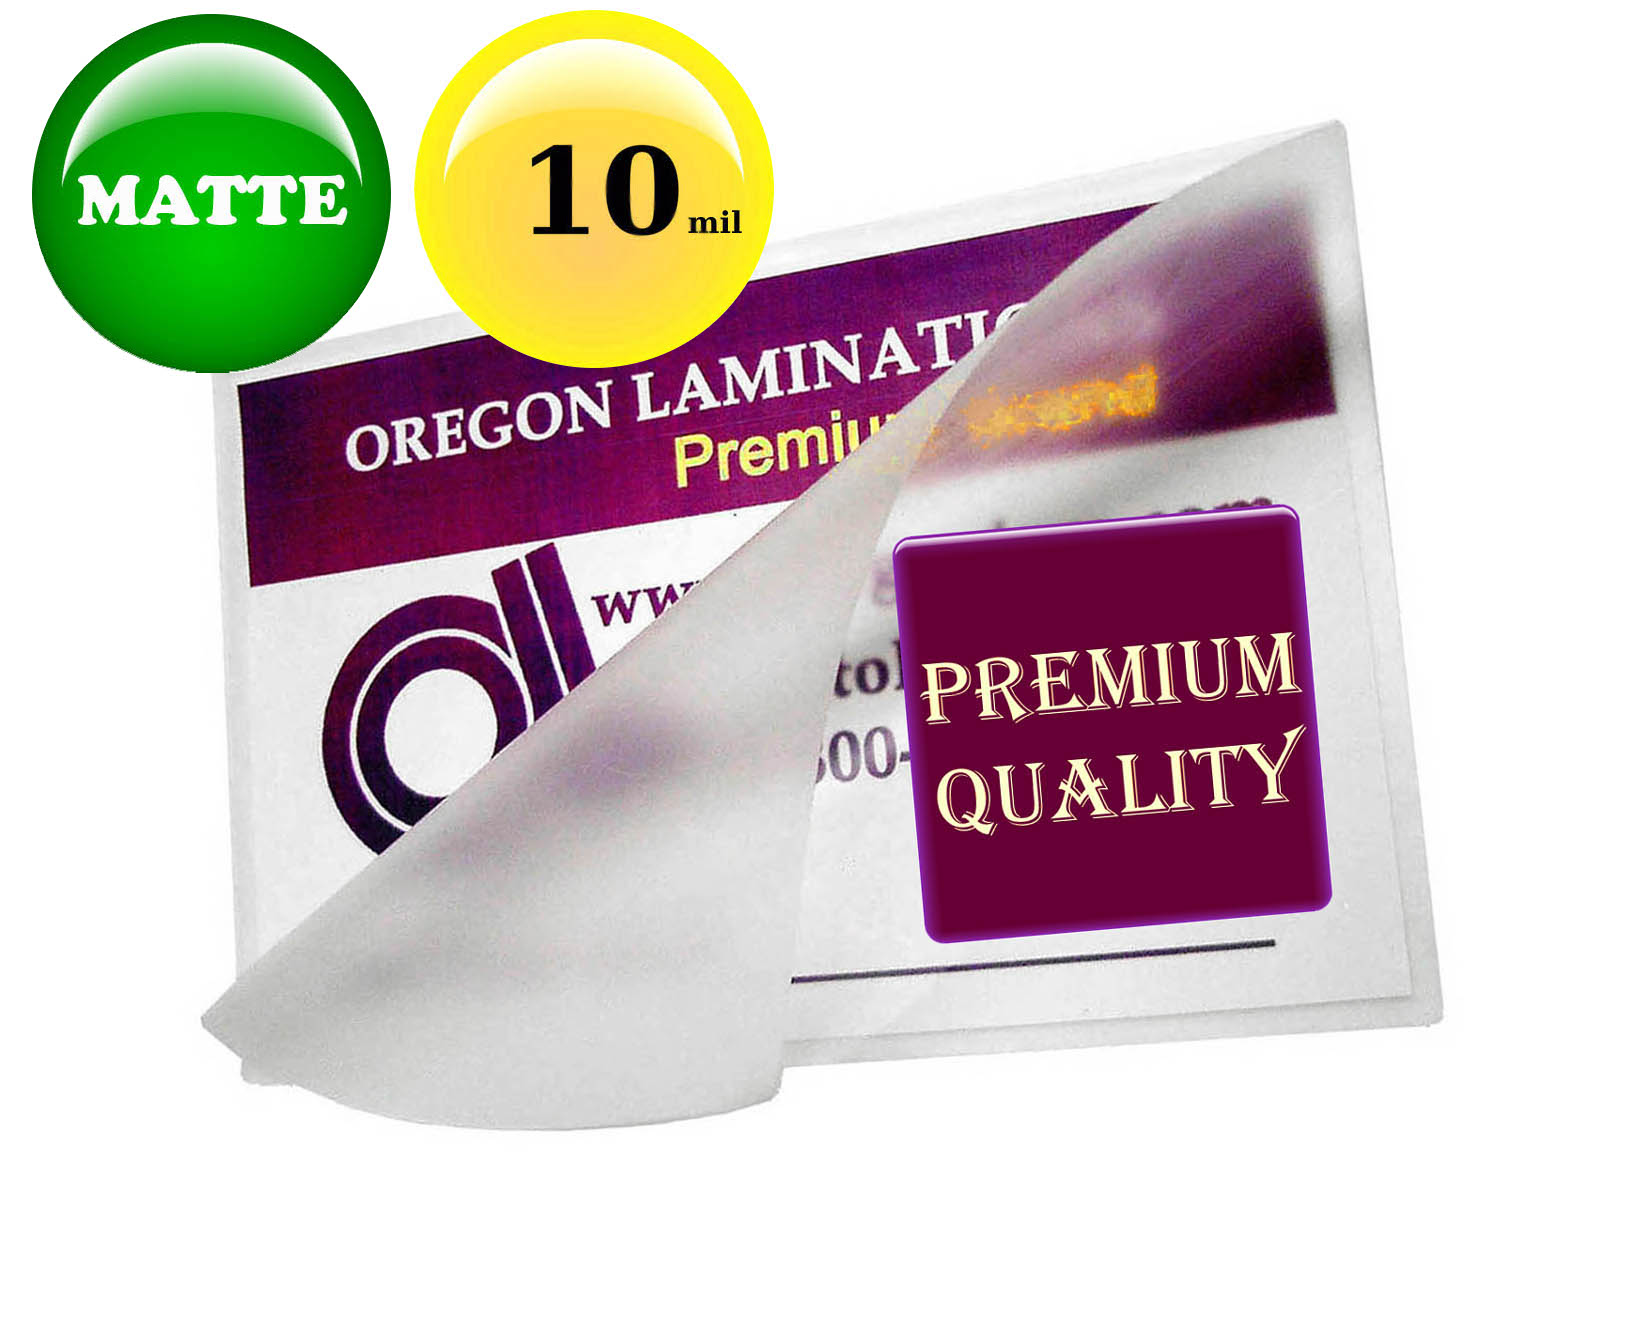 100 Legal 10 Mil Laminating Pouches Laminator Sheets 9 x 14-1/2 Quality 